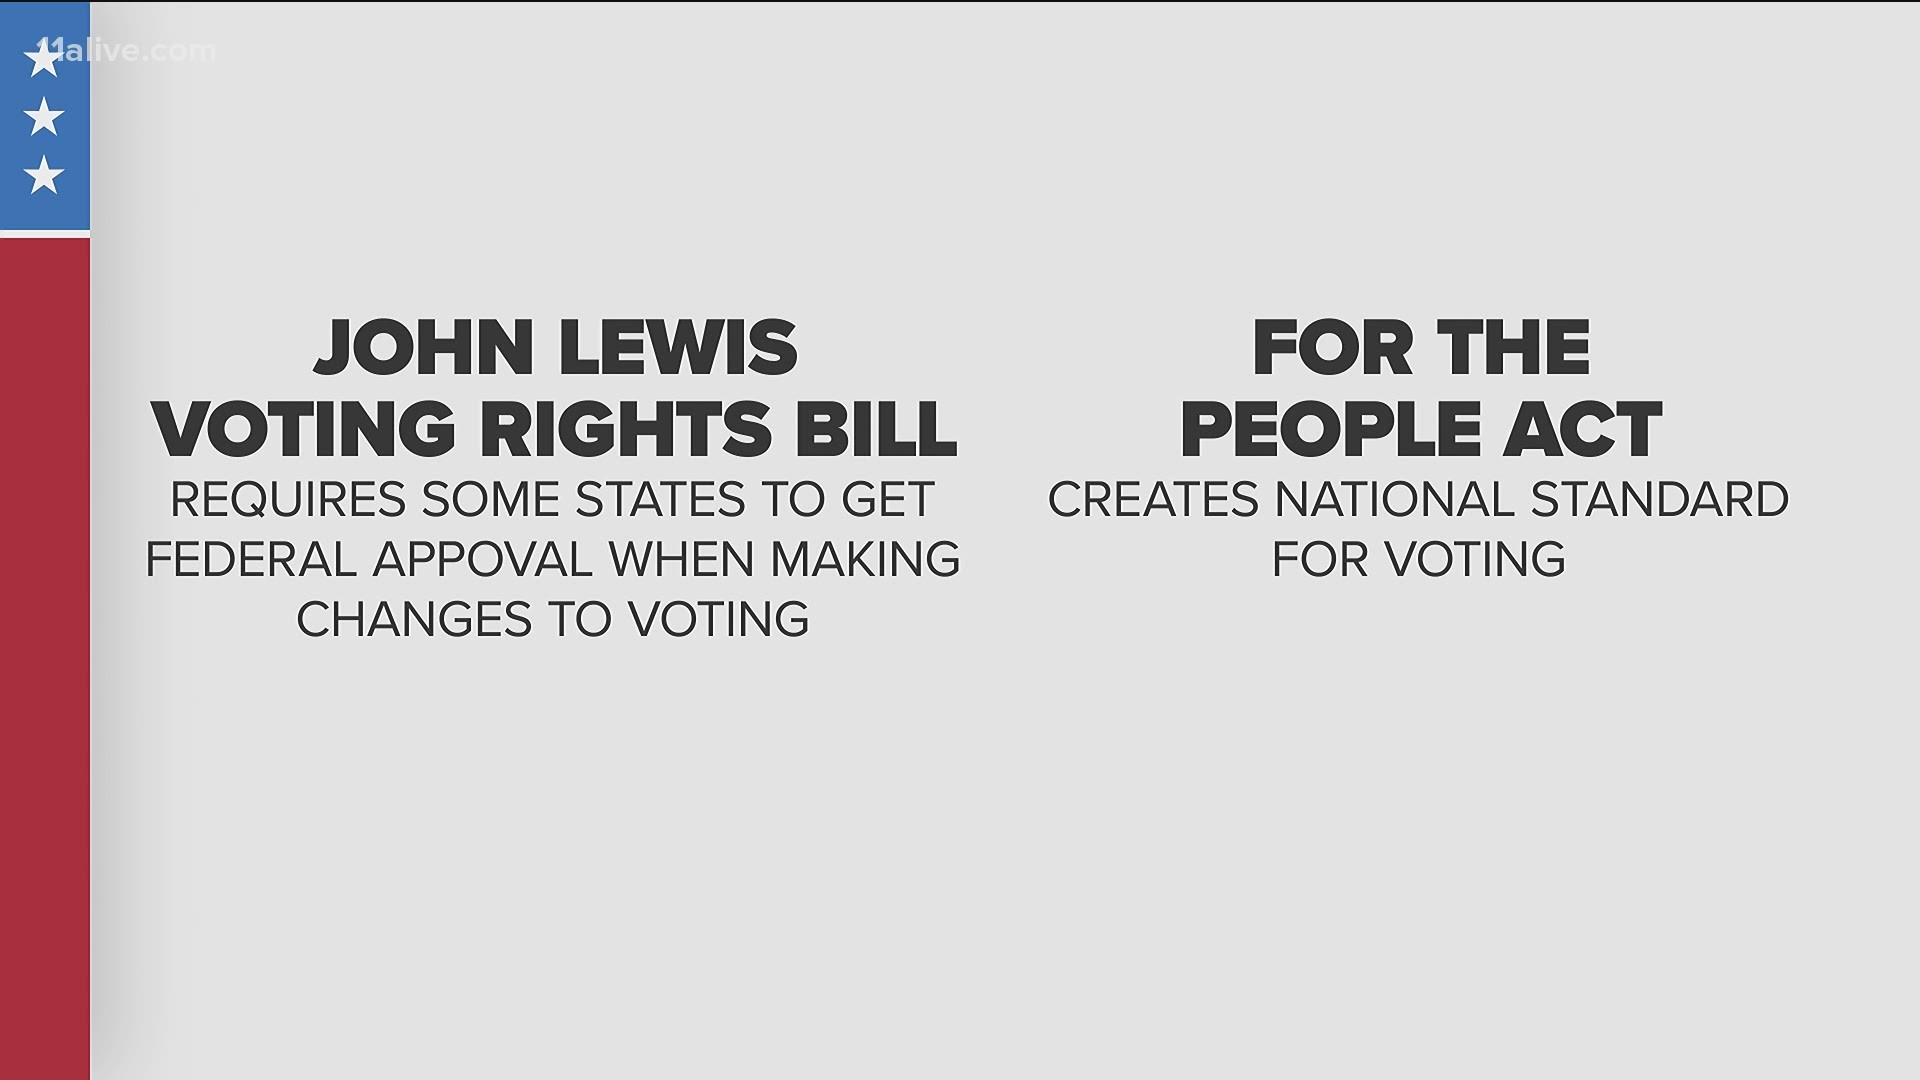 Here is how the two bills are different.